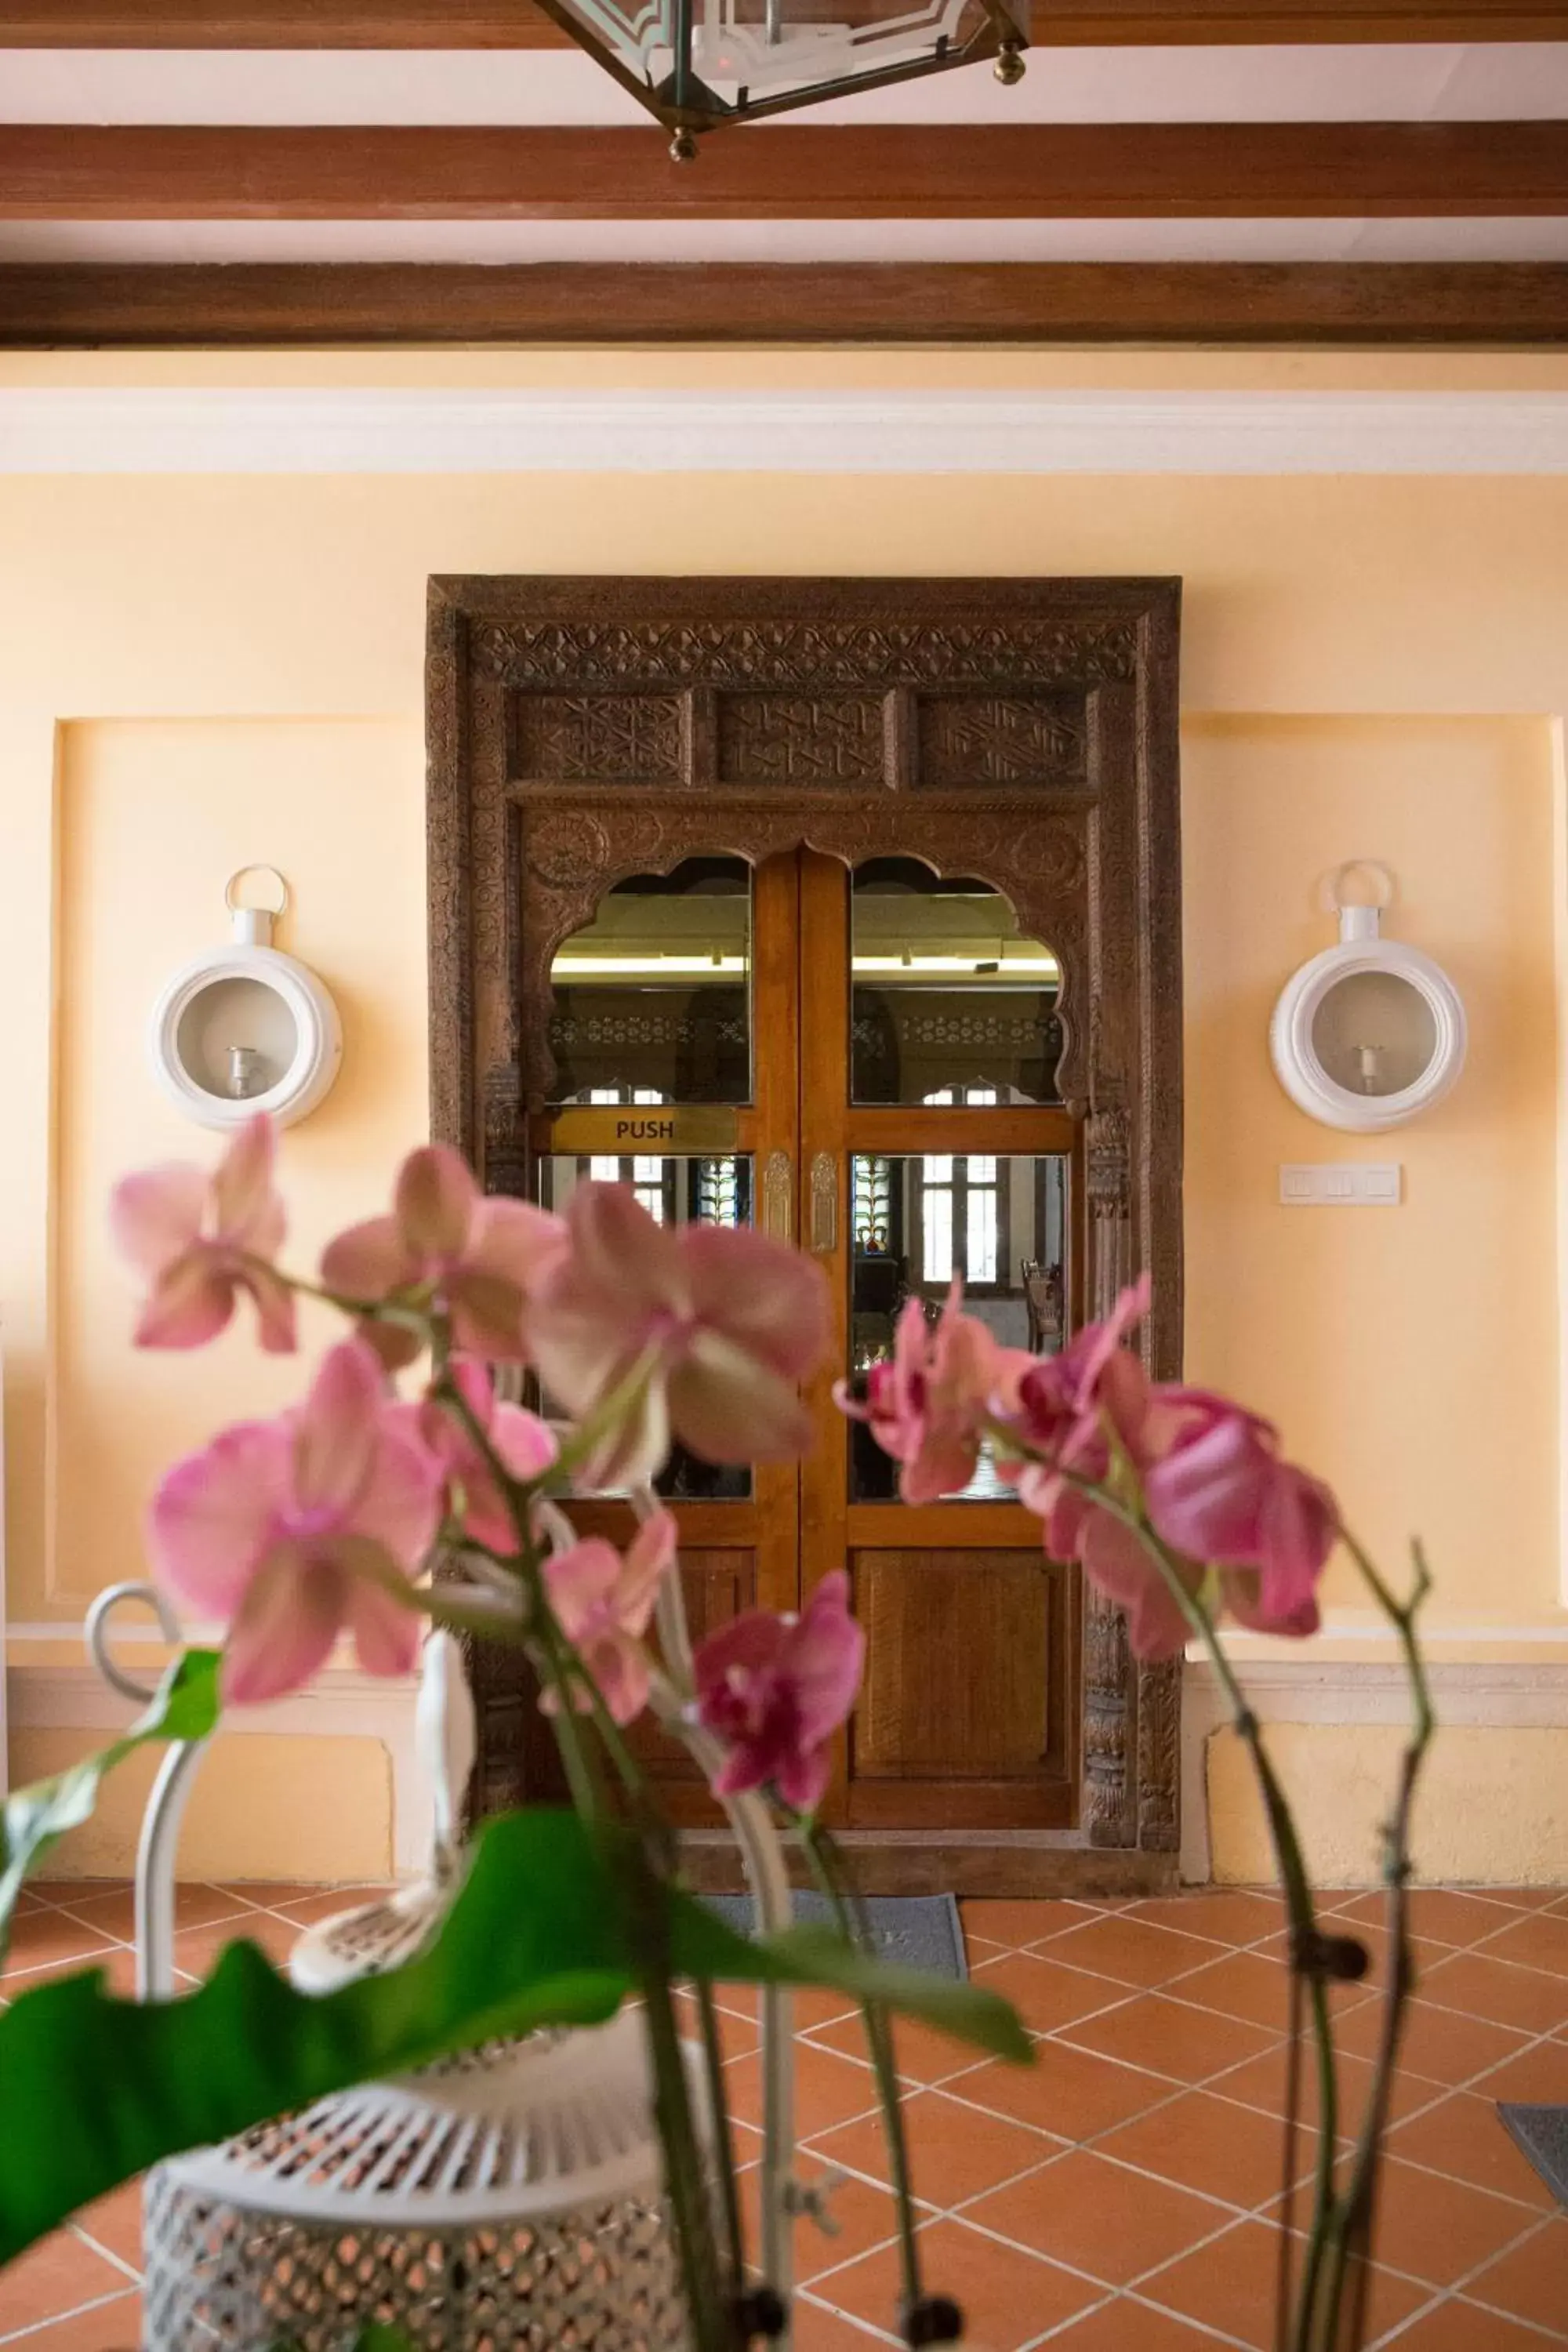 Area and facilities in Jawi Peranakan Mansion